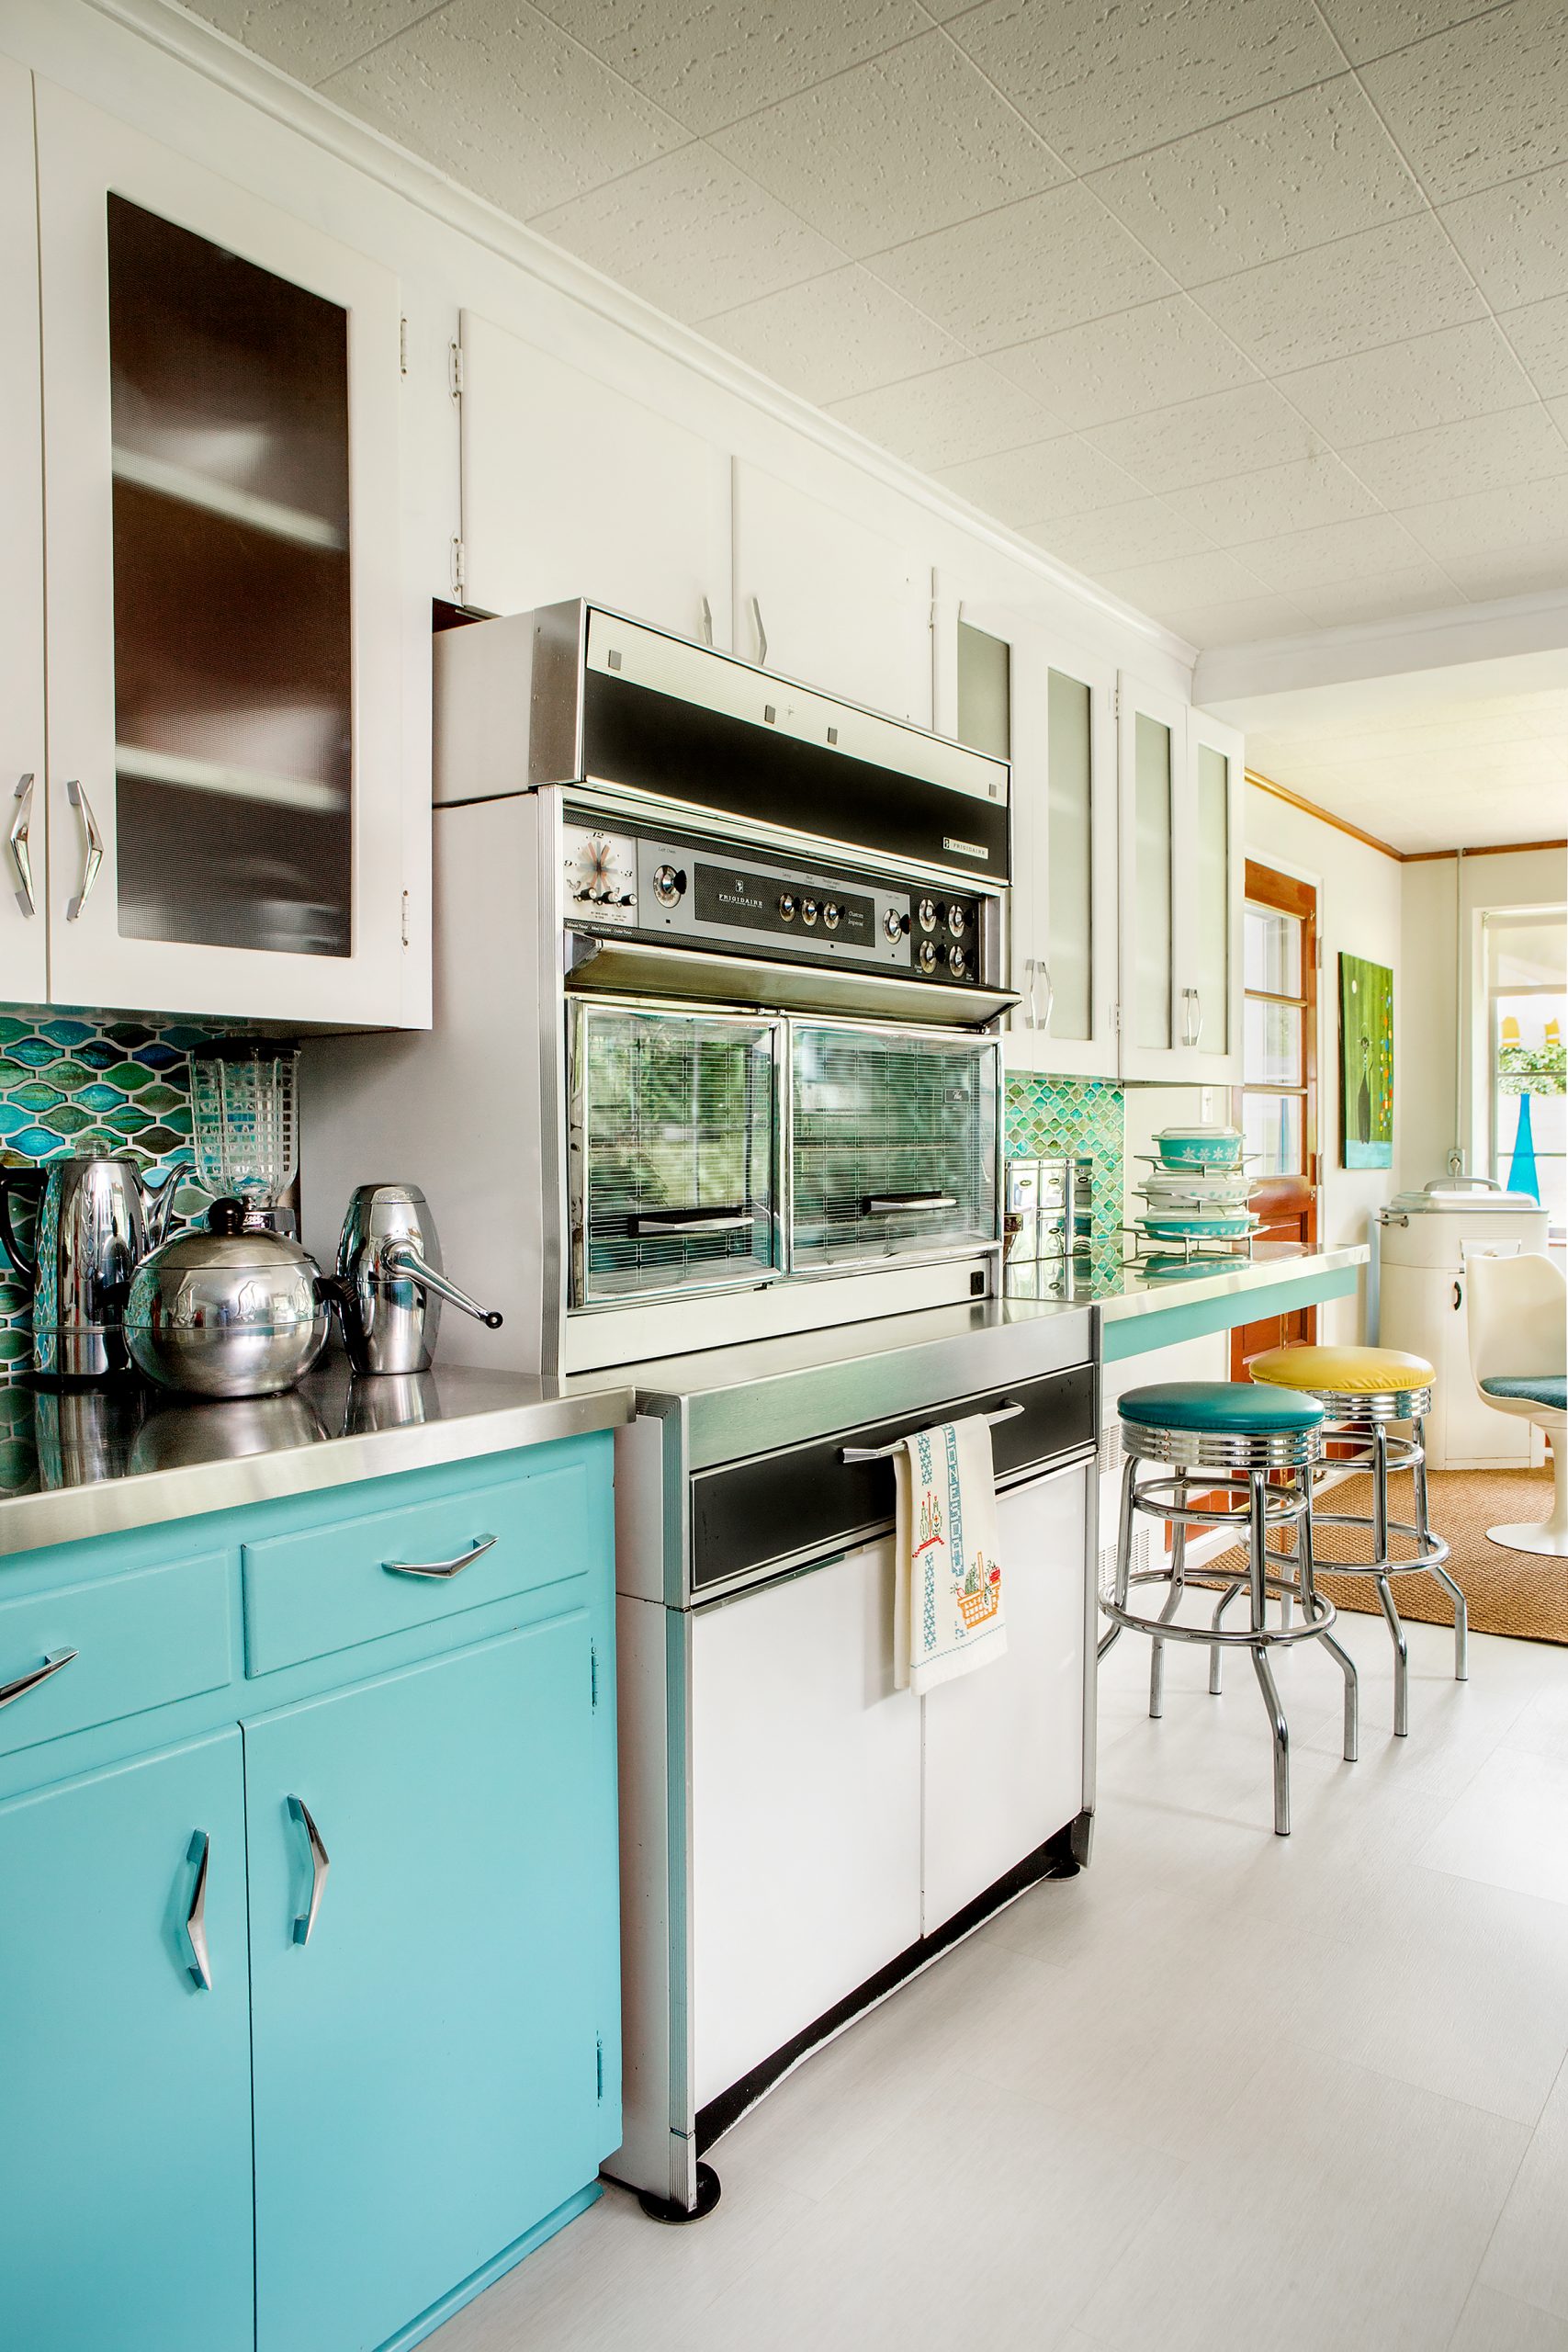 The kitchen is lined with cabinets original to the home, accented by colorful turquoise glass tiles in a geometric pattern by Hirsch. The oven range, found on eBay, is interestingly the original Frigidaire version as seen on the sitcom Bewitched!